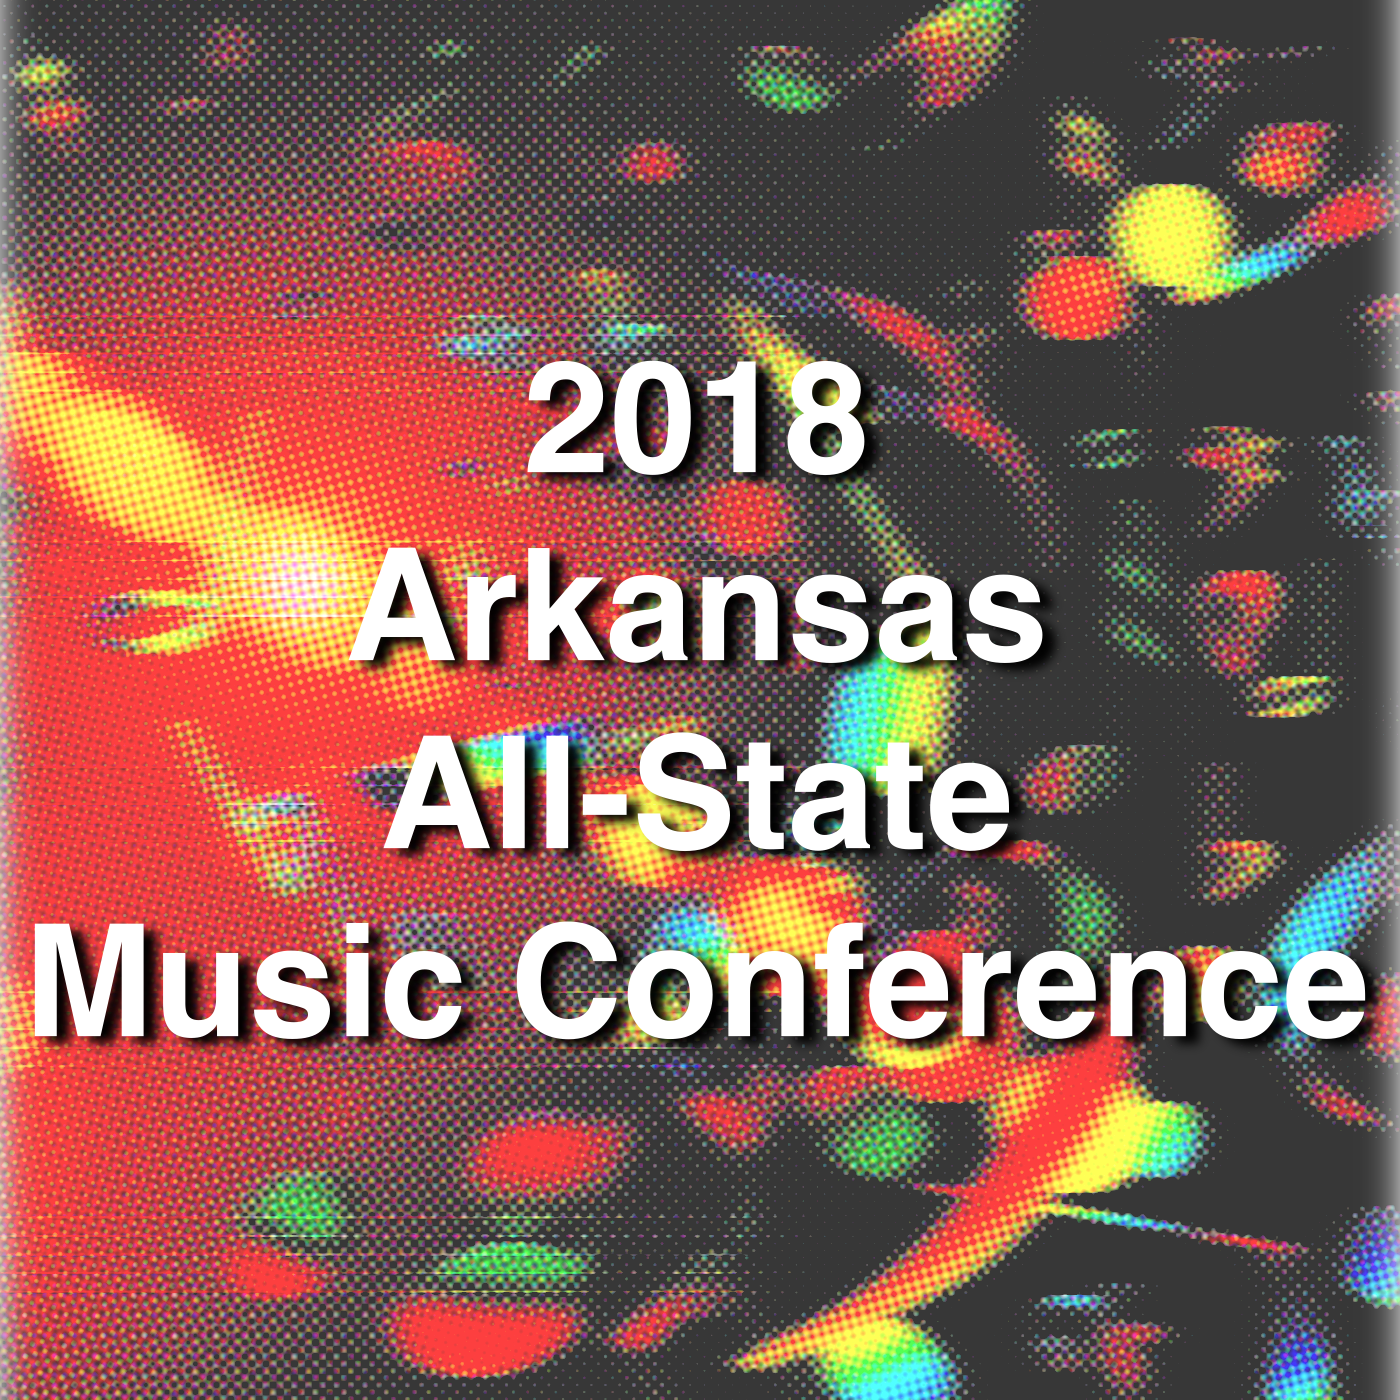 2018 Arkansas All-State Music Conference